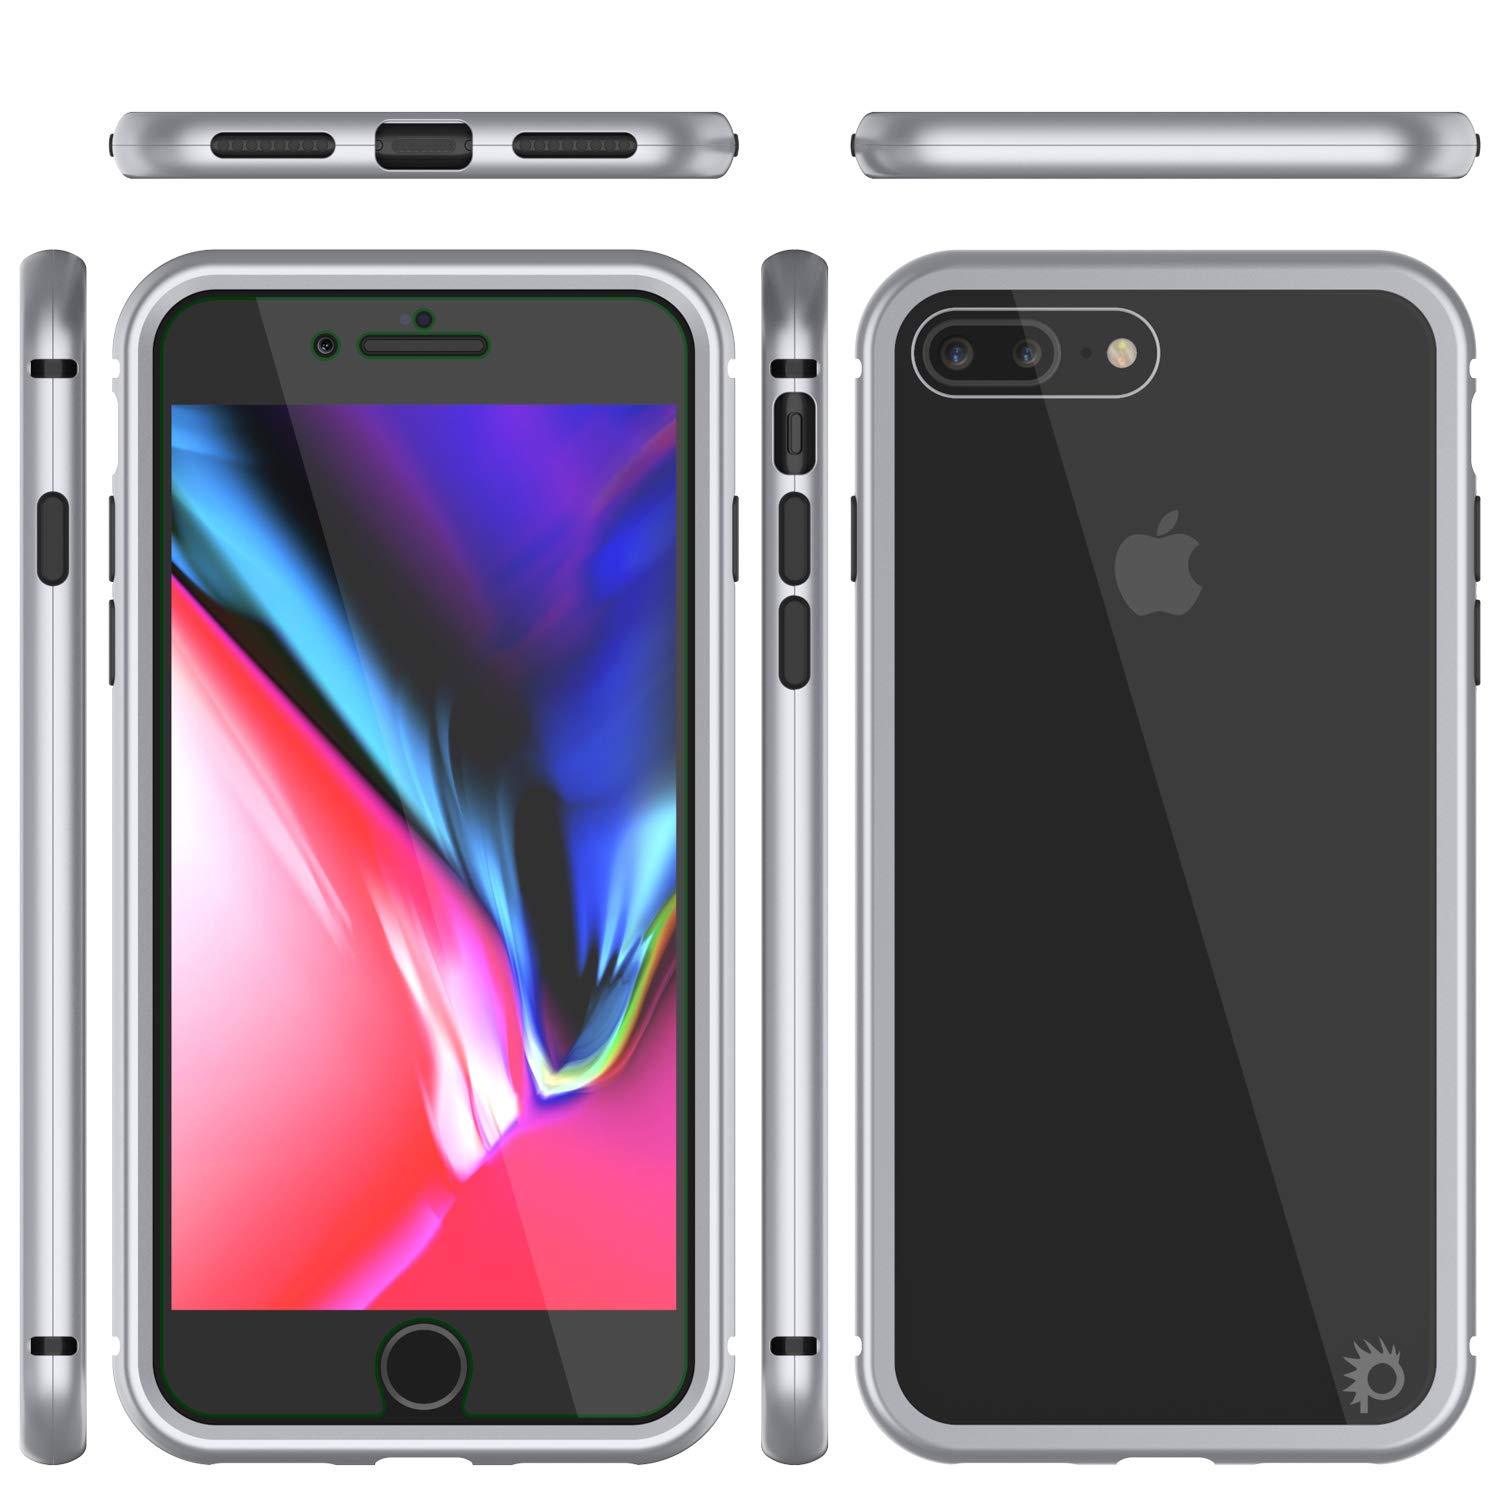 iPhone 8+ Plus Case, Punkcase Magnetix 2.0 Protective TPU Cover W/ Tempered Glass Screen Protector [Silver]